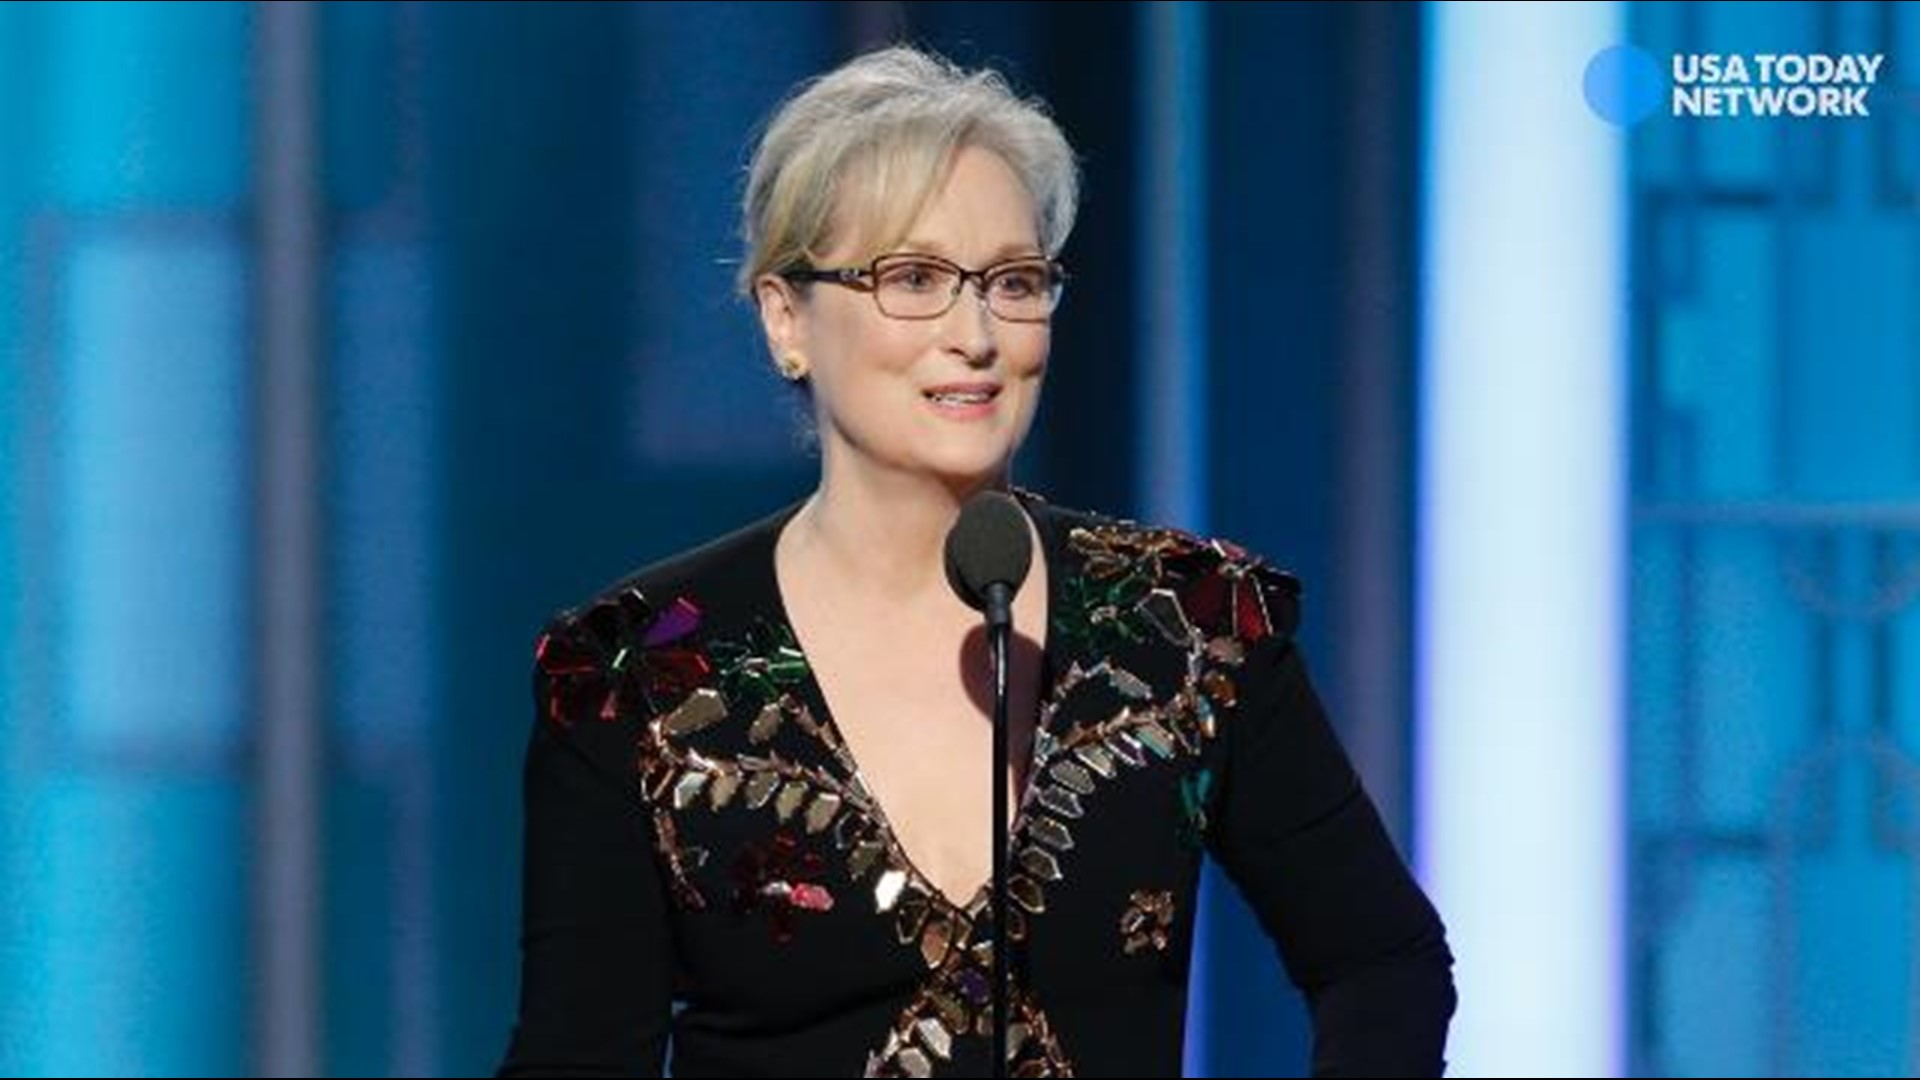 When Meryl Streep was honored with the Cecil B. DeMille Award at the 74th Golden Globe Awards, her speech recognized diversity, protection of the press and criticism of president-elect Trump.